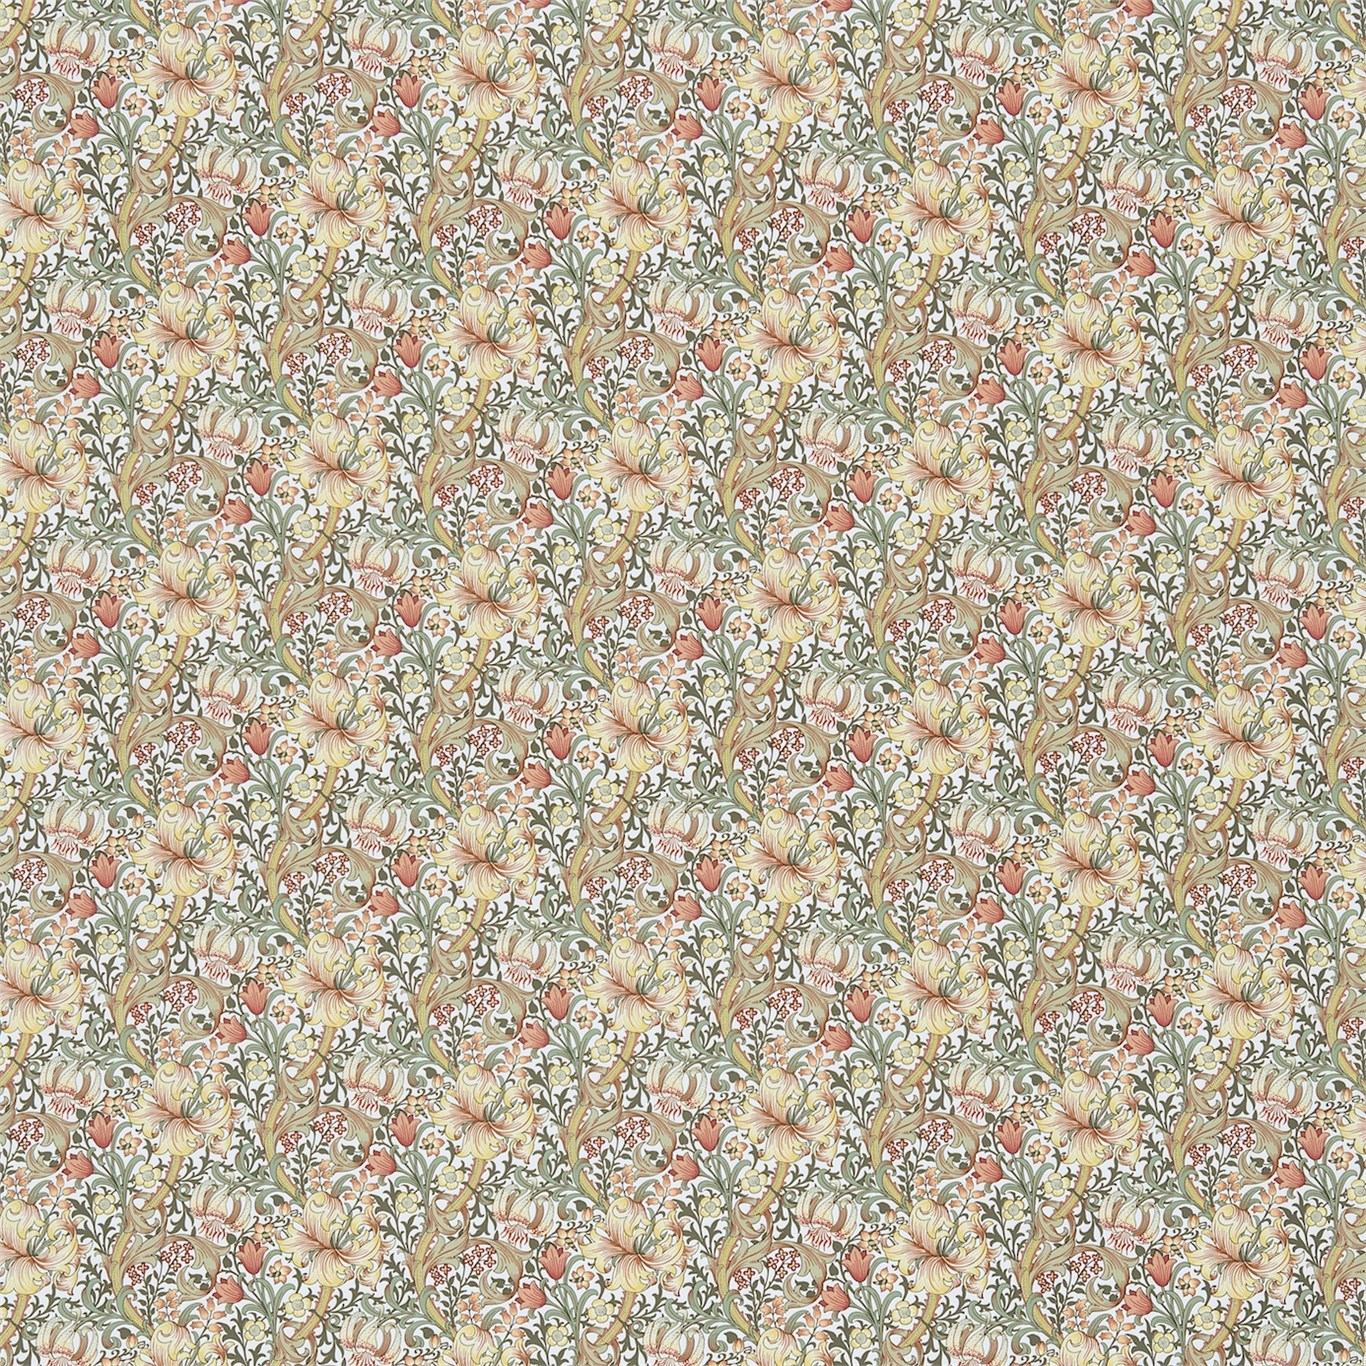 Golden Lily Minor Floral and Botanical Fabric by William Morris & Co.